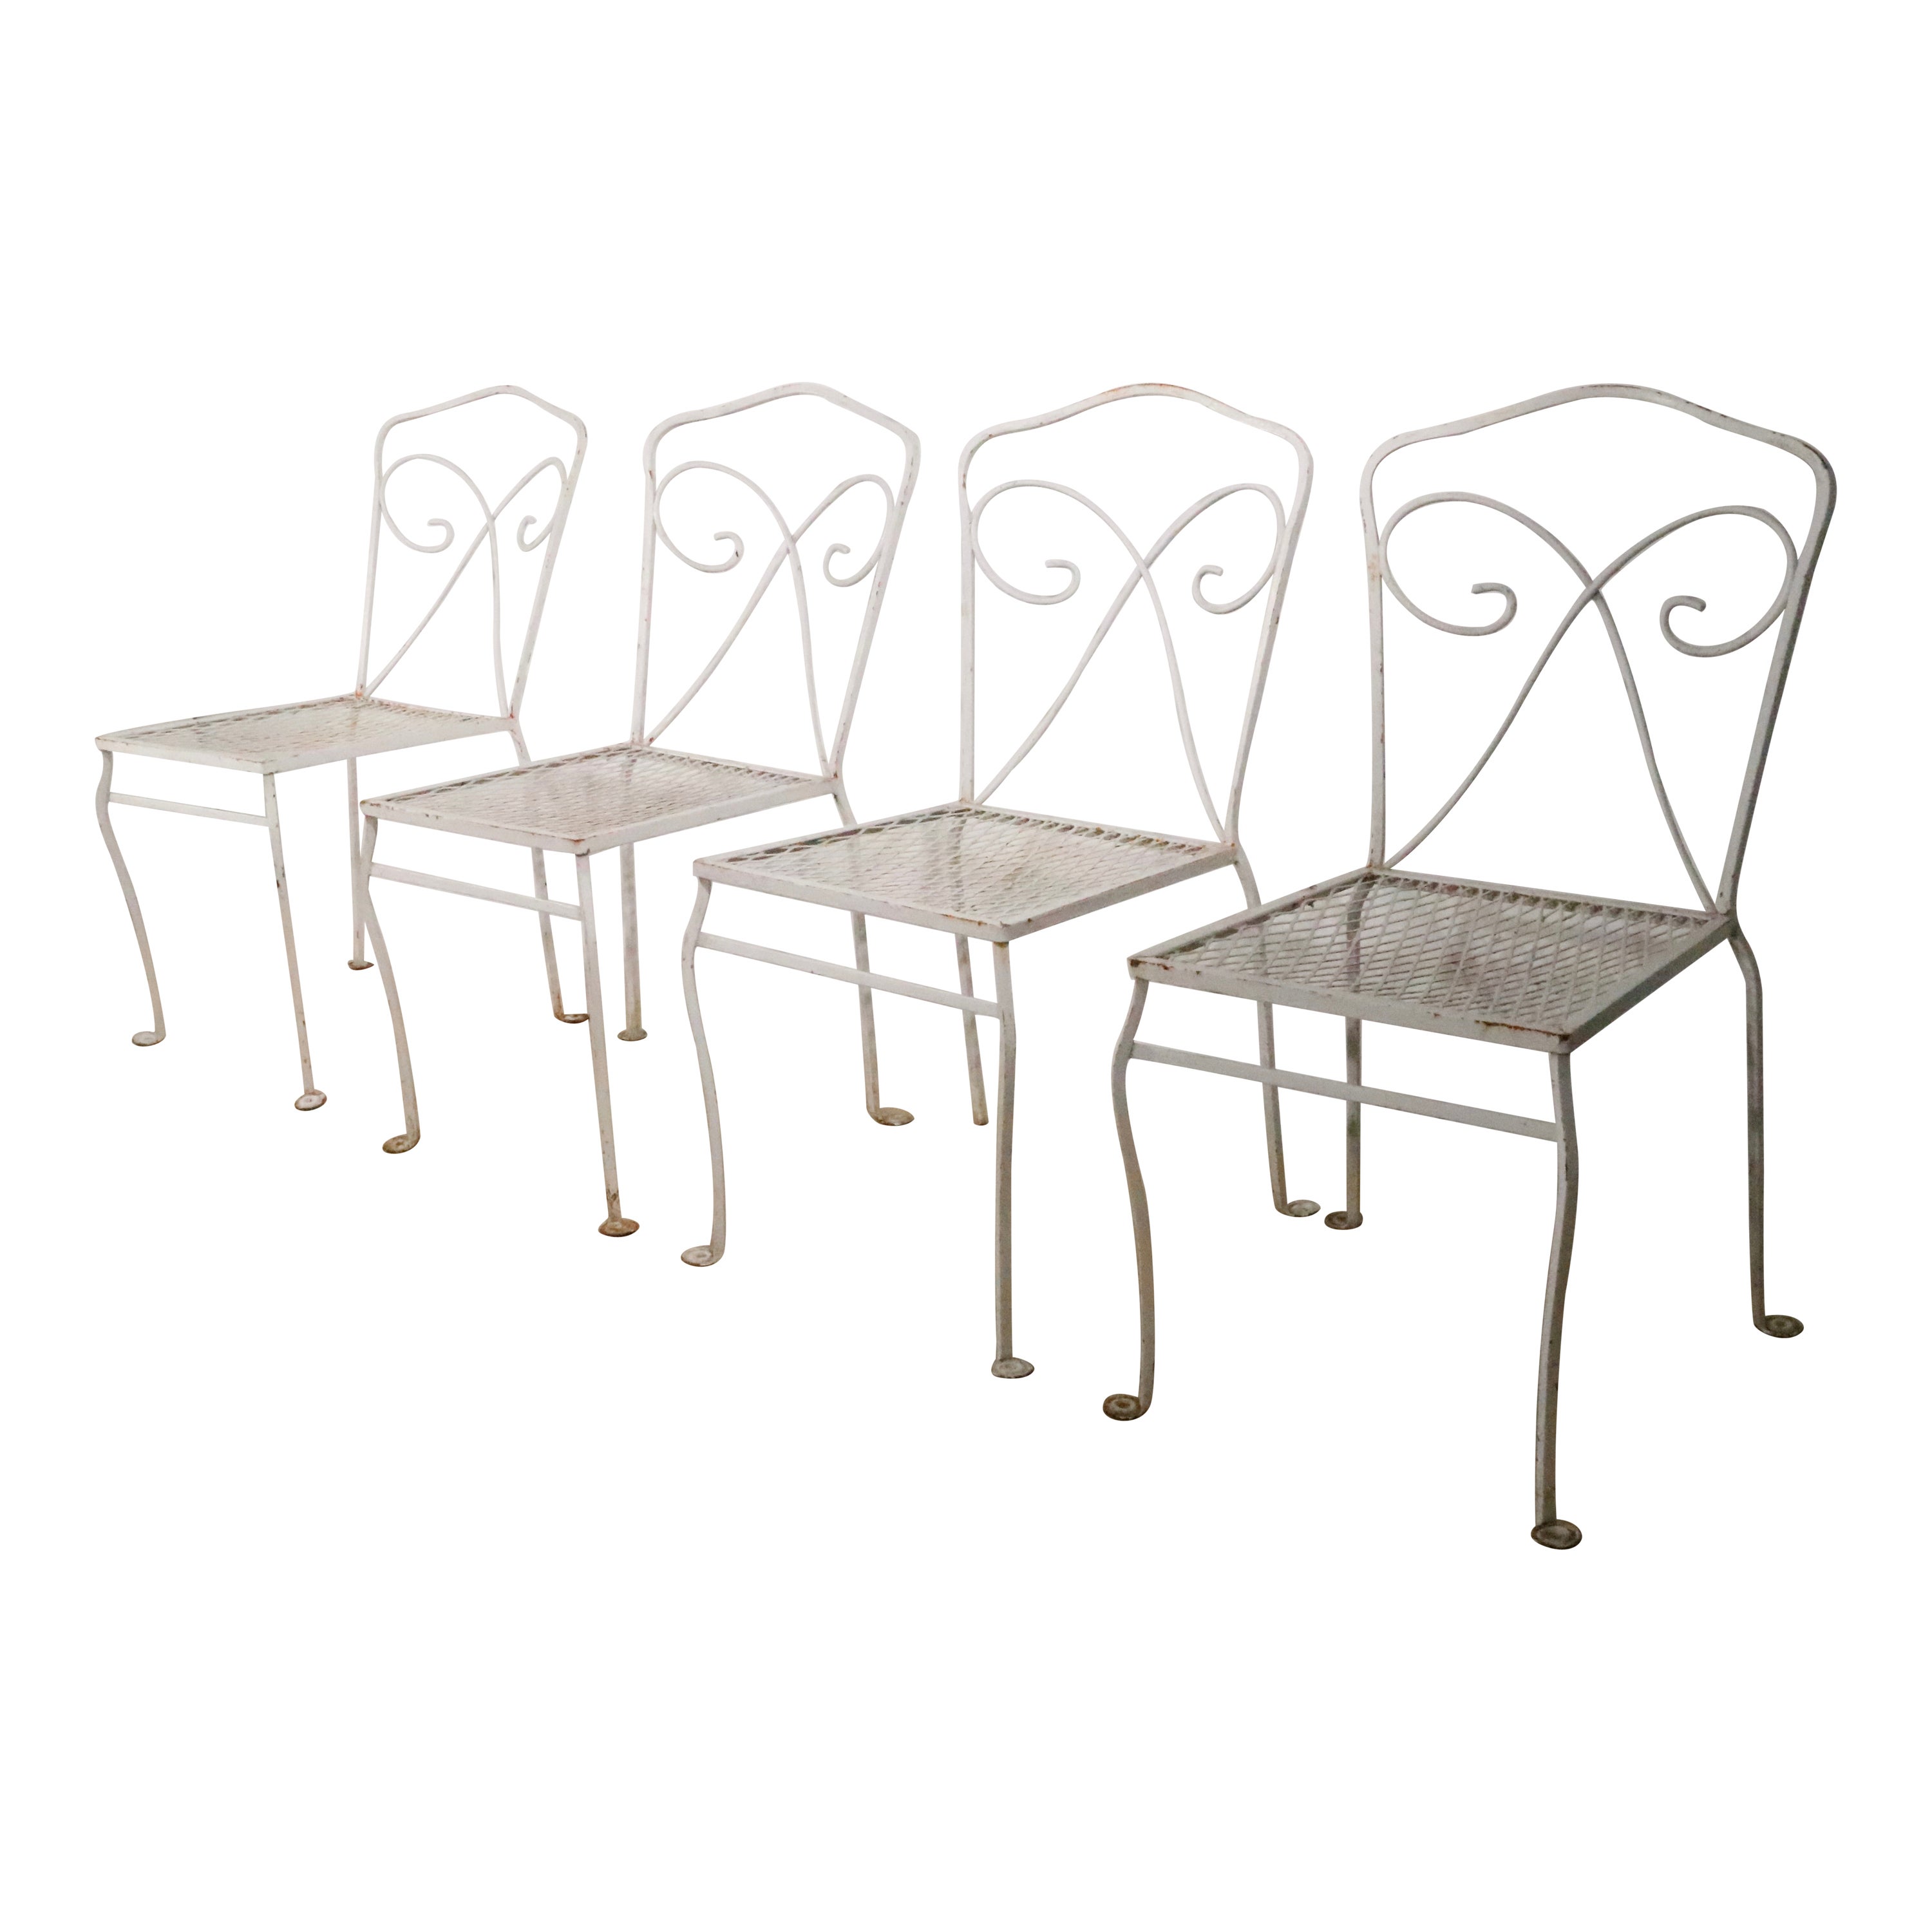 Set of Four Wrought Iron Garden Patio Chairs Possibly by Woodard c 1950/1970s  For Sale